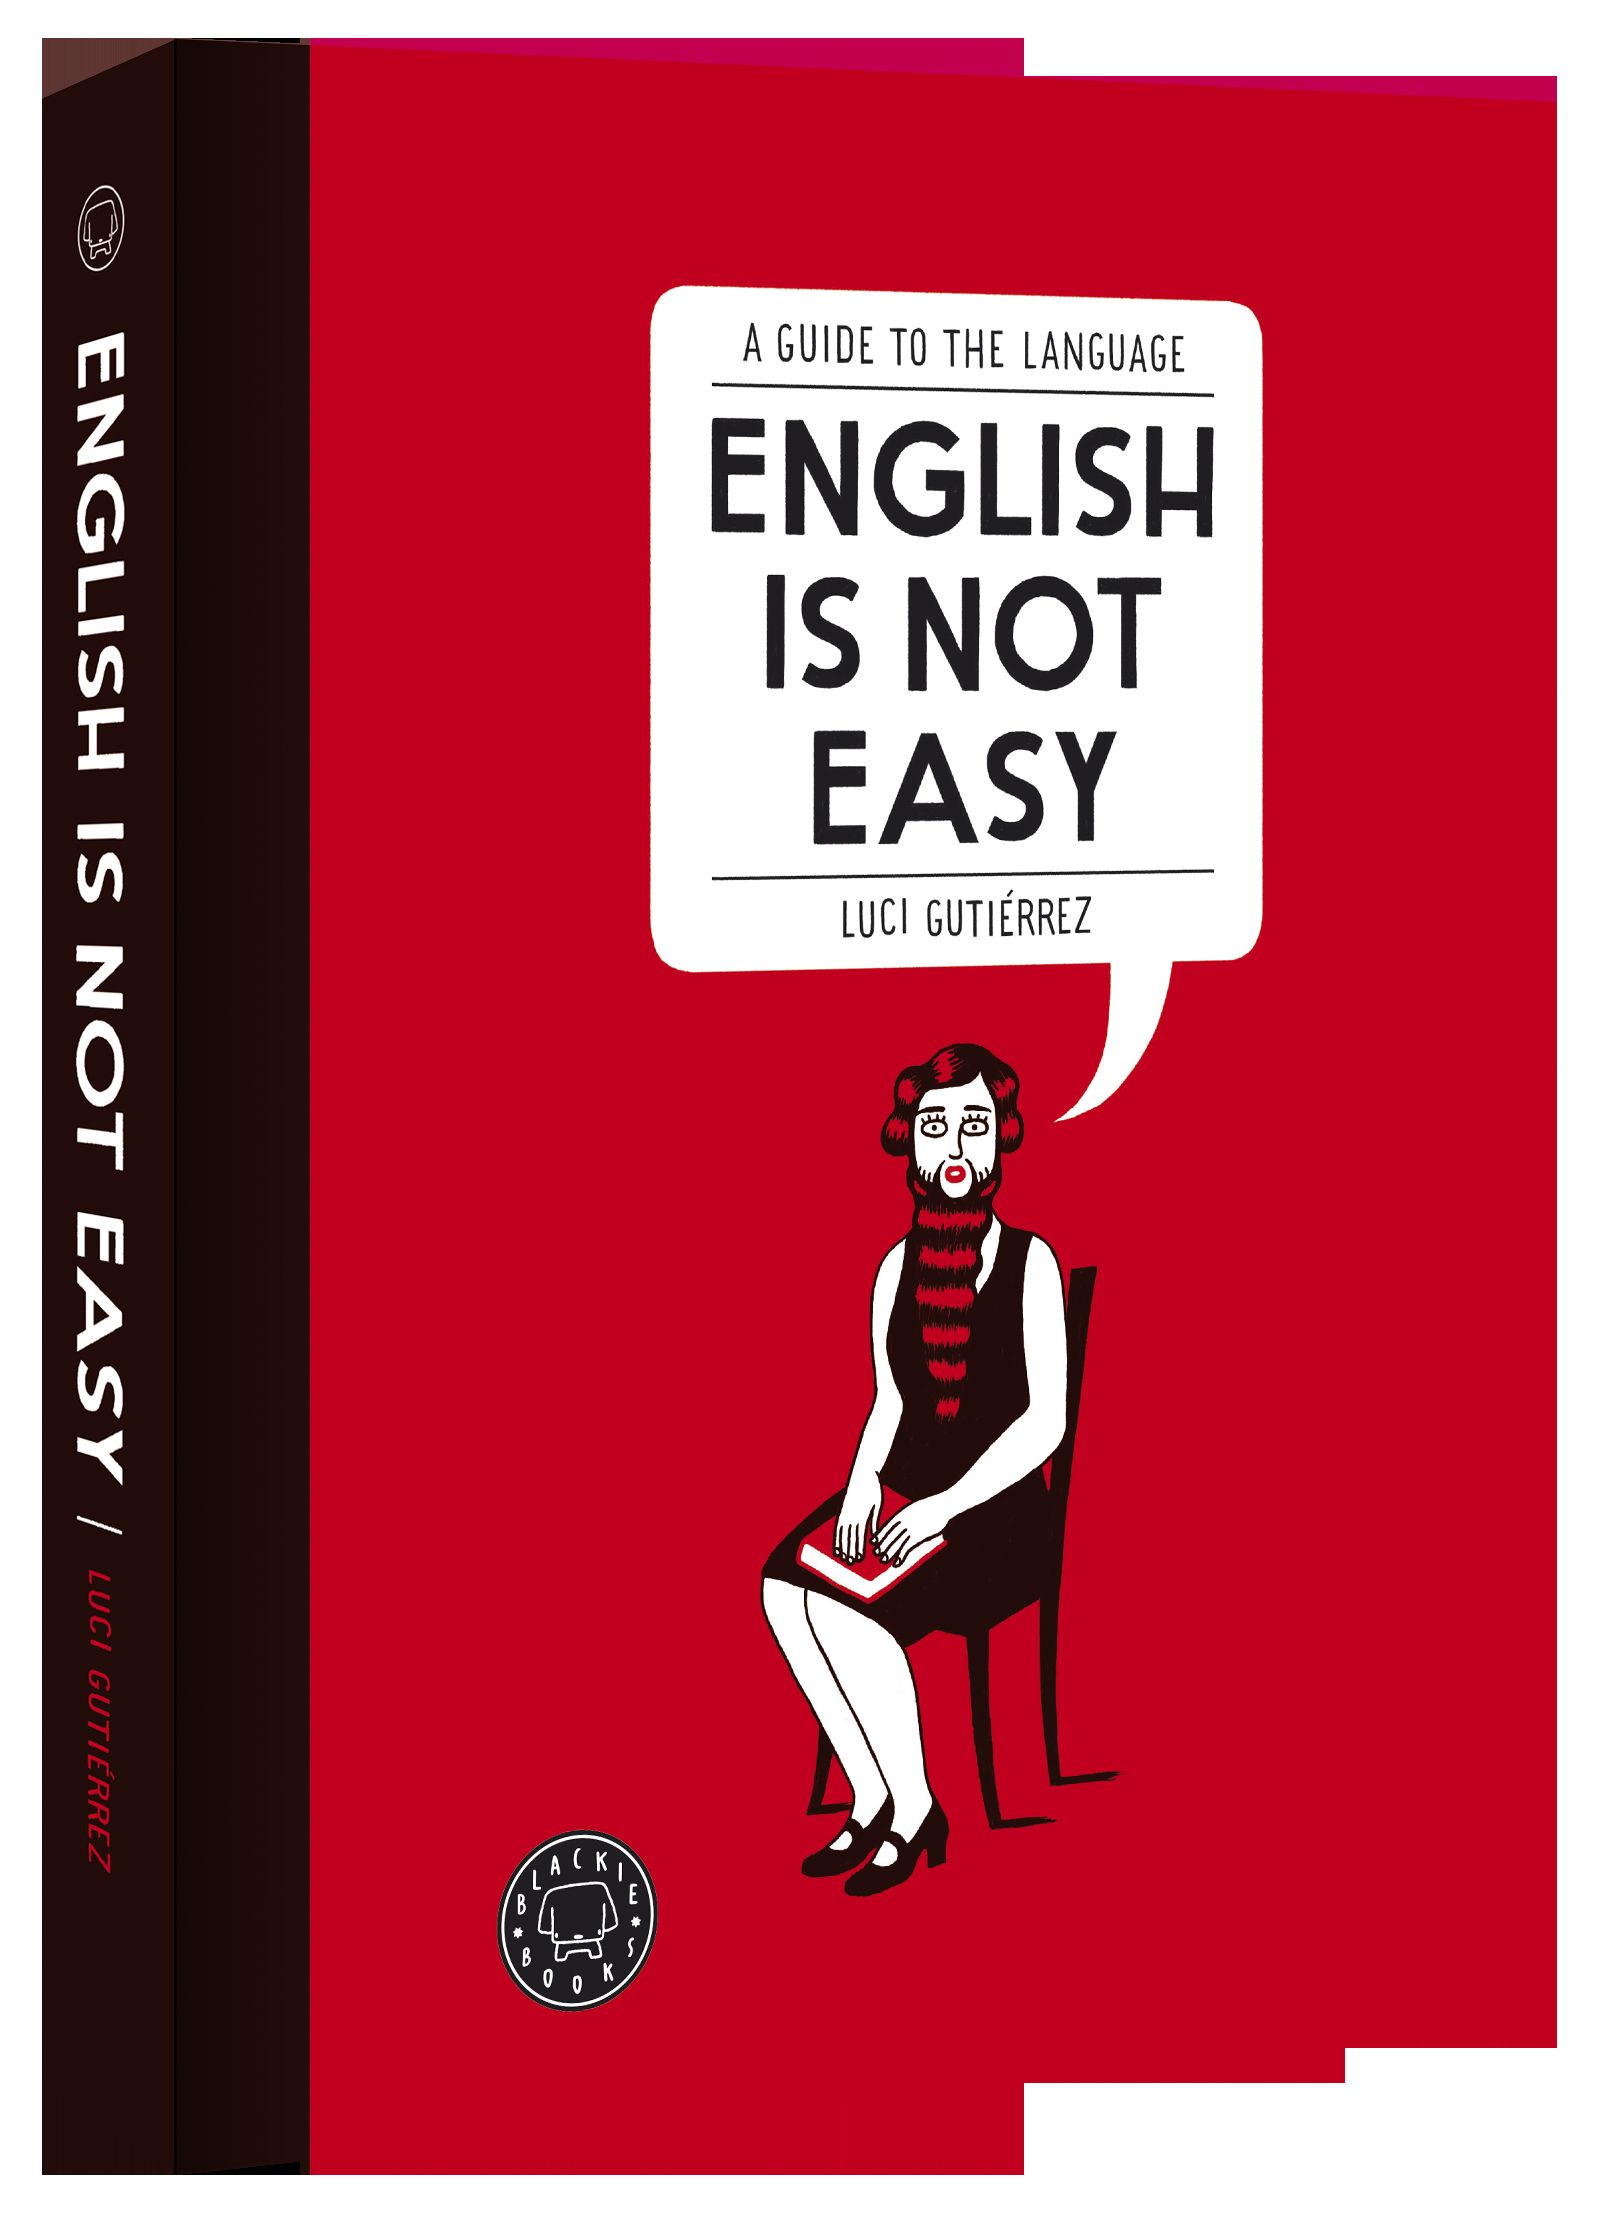 ENGLISH IS NOT EASY. A GUIDE TO THE LANGUAGE